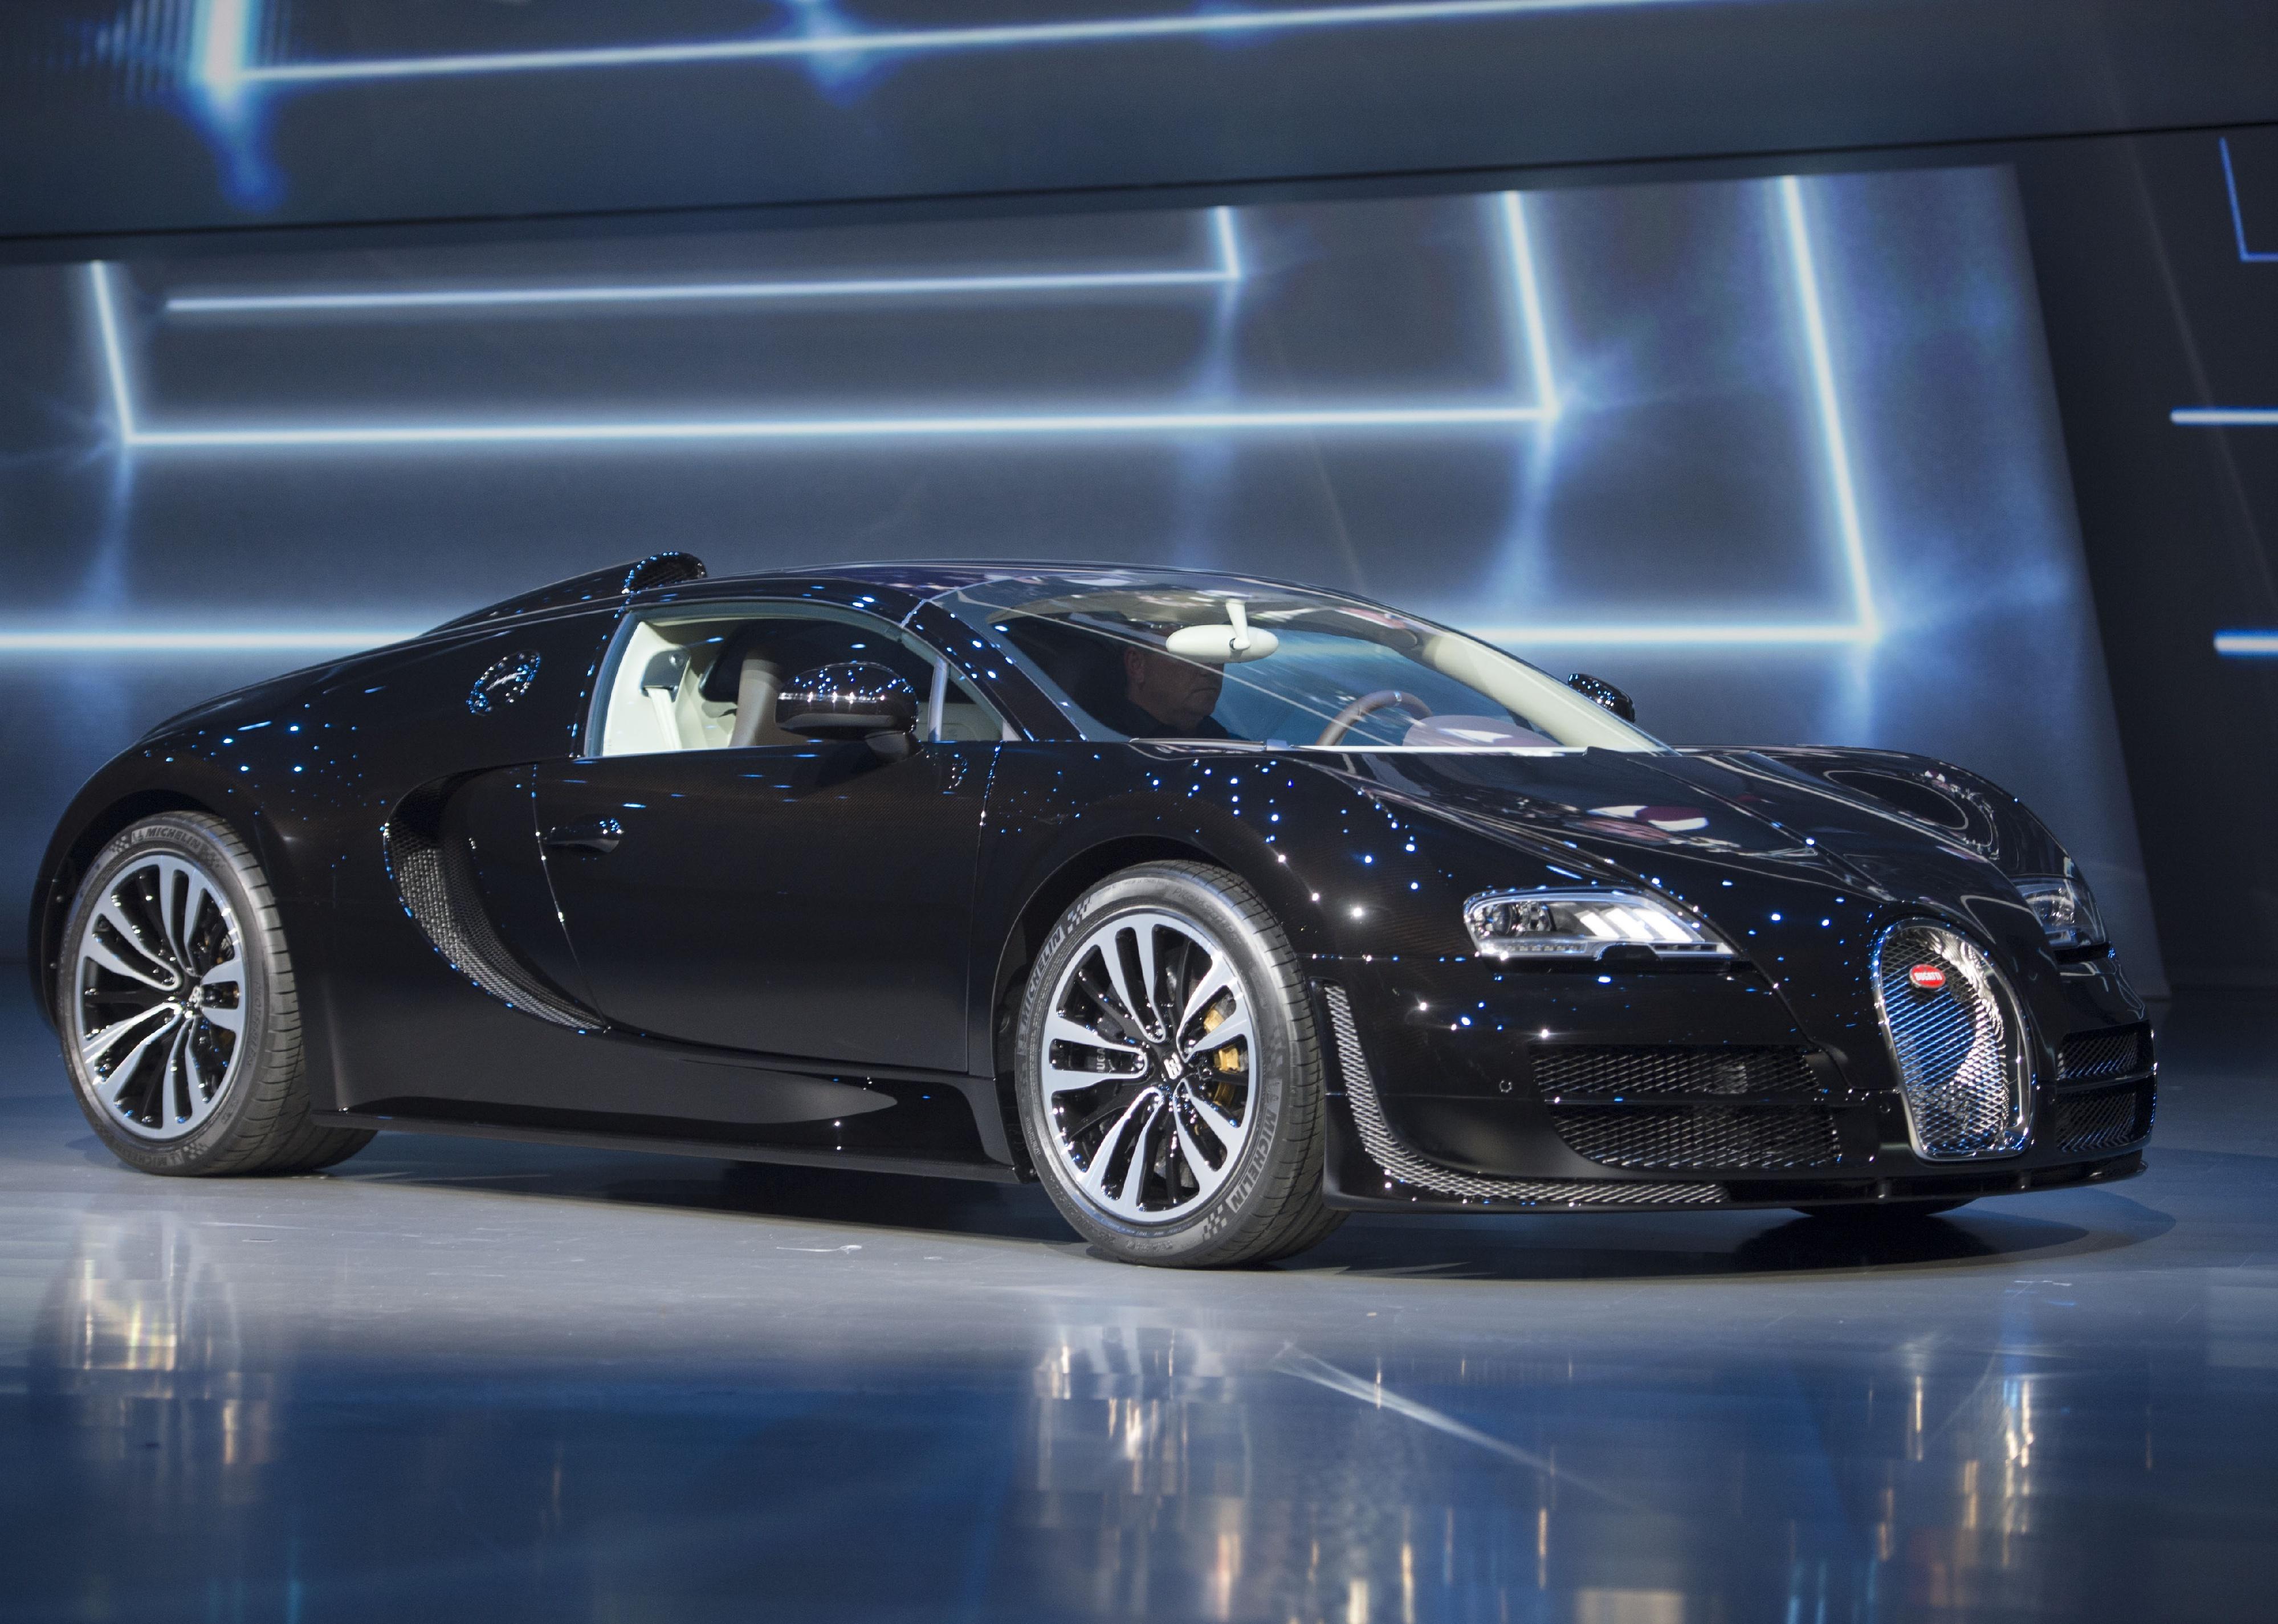 The new Bugatti Veyron is pictured during the Group night at the international motor show IAA.